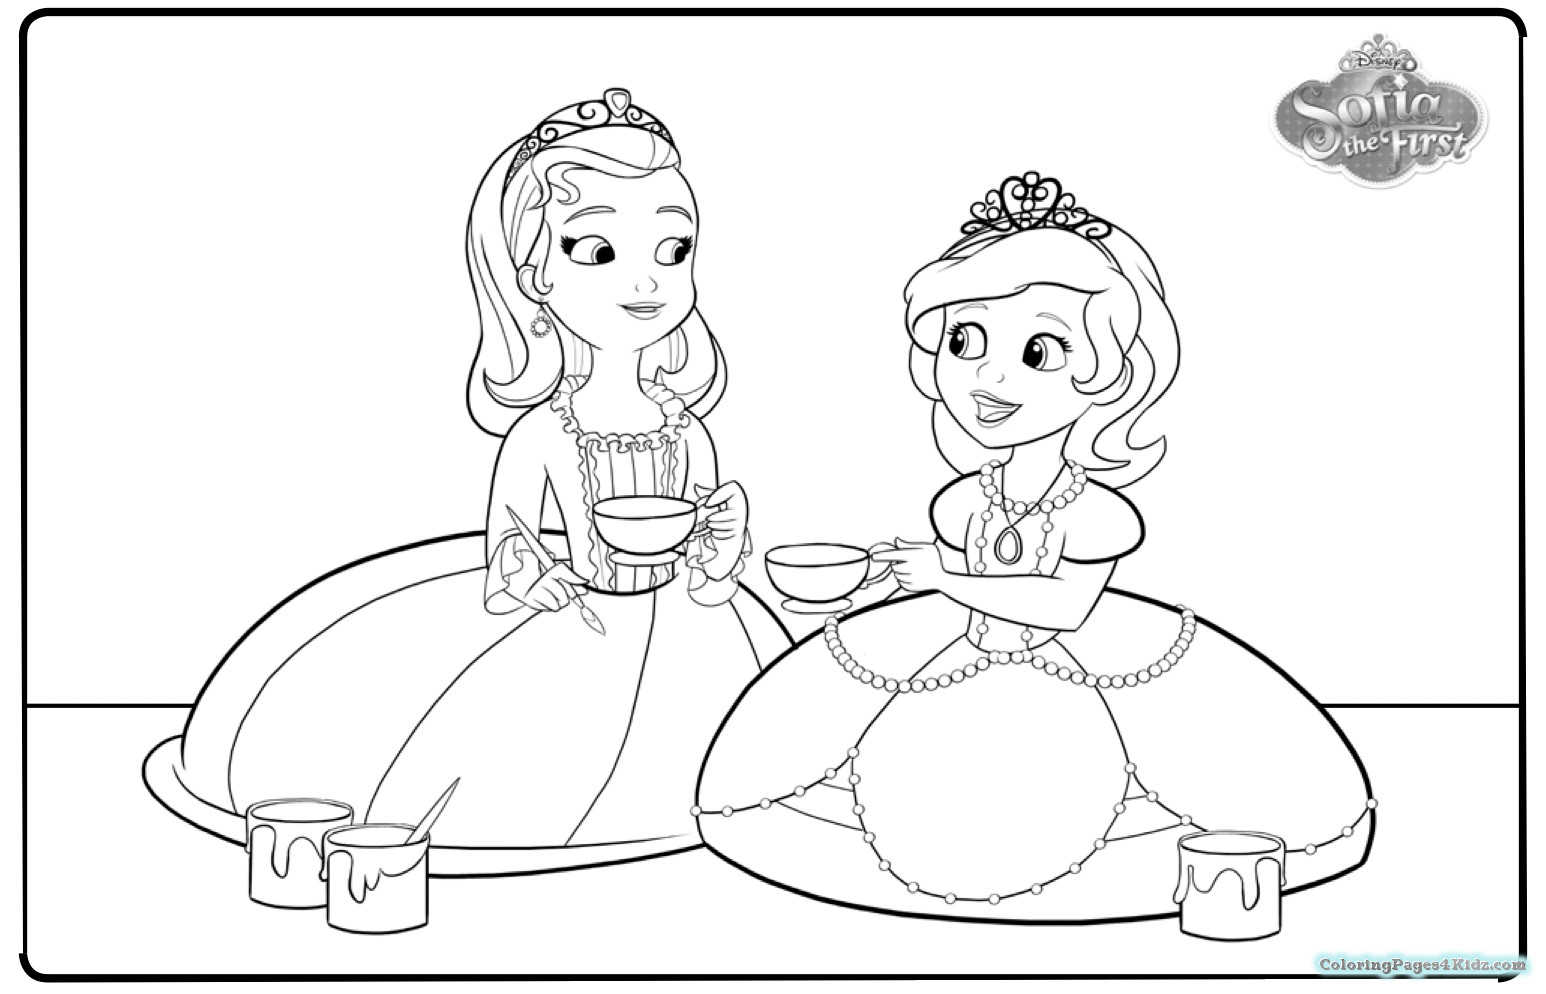 27+ Awesome Photo of Sofia The First Coloring Page - albanysinsanity.com